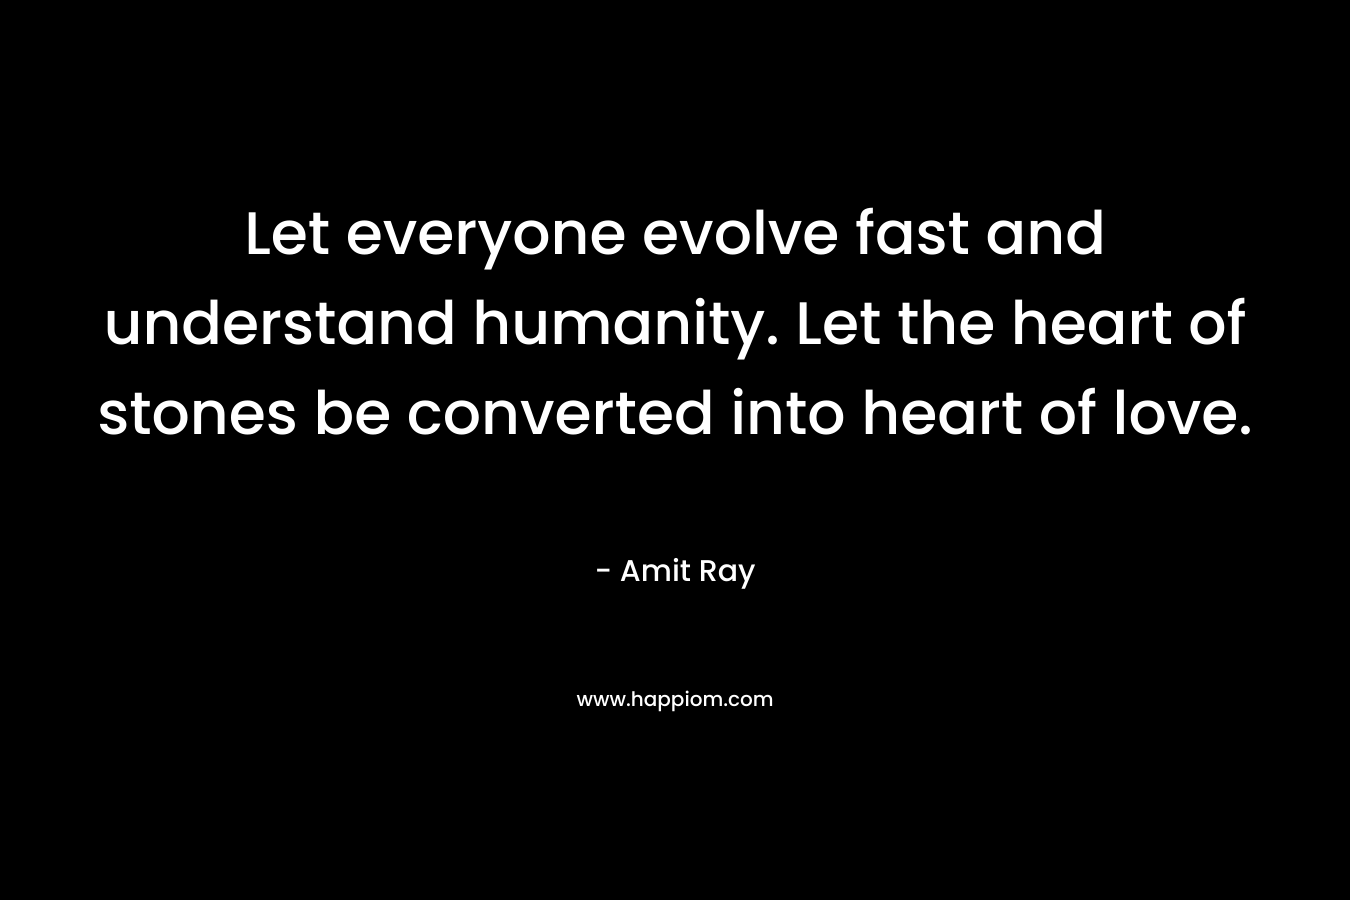 Let everyone evolve fast and understand humanity. Let the heart of stones be converted into heart of love.